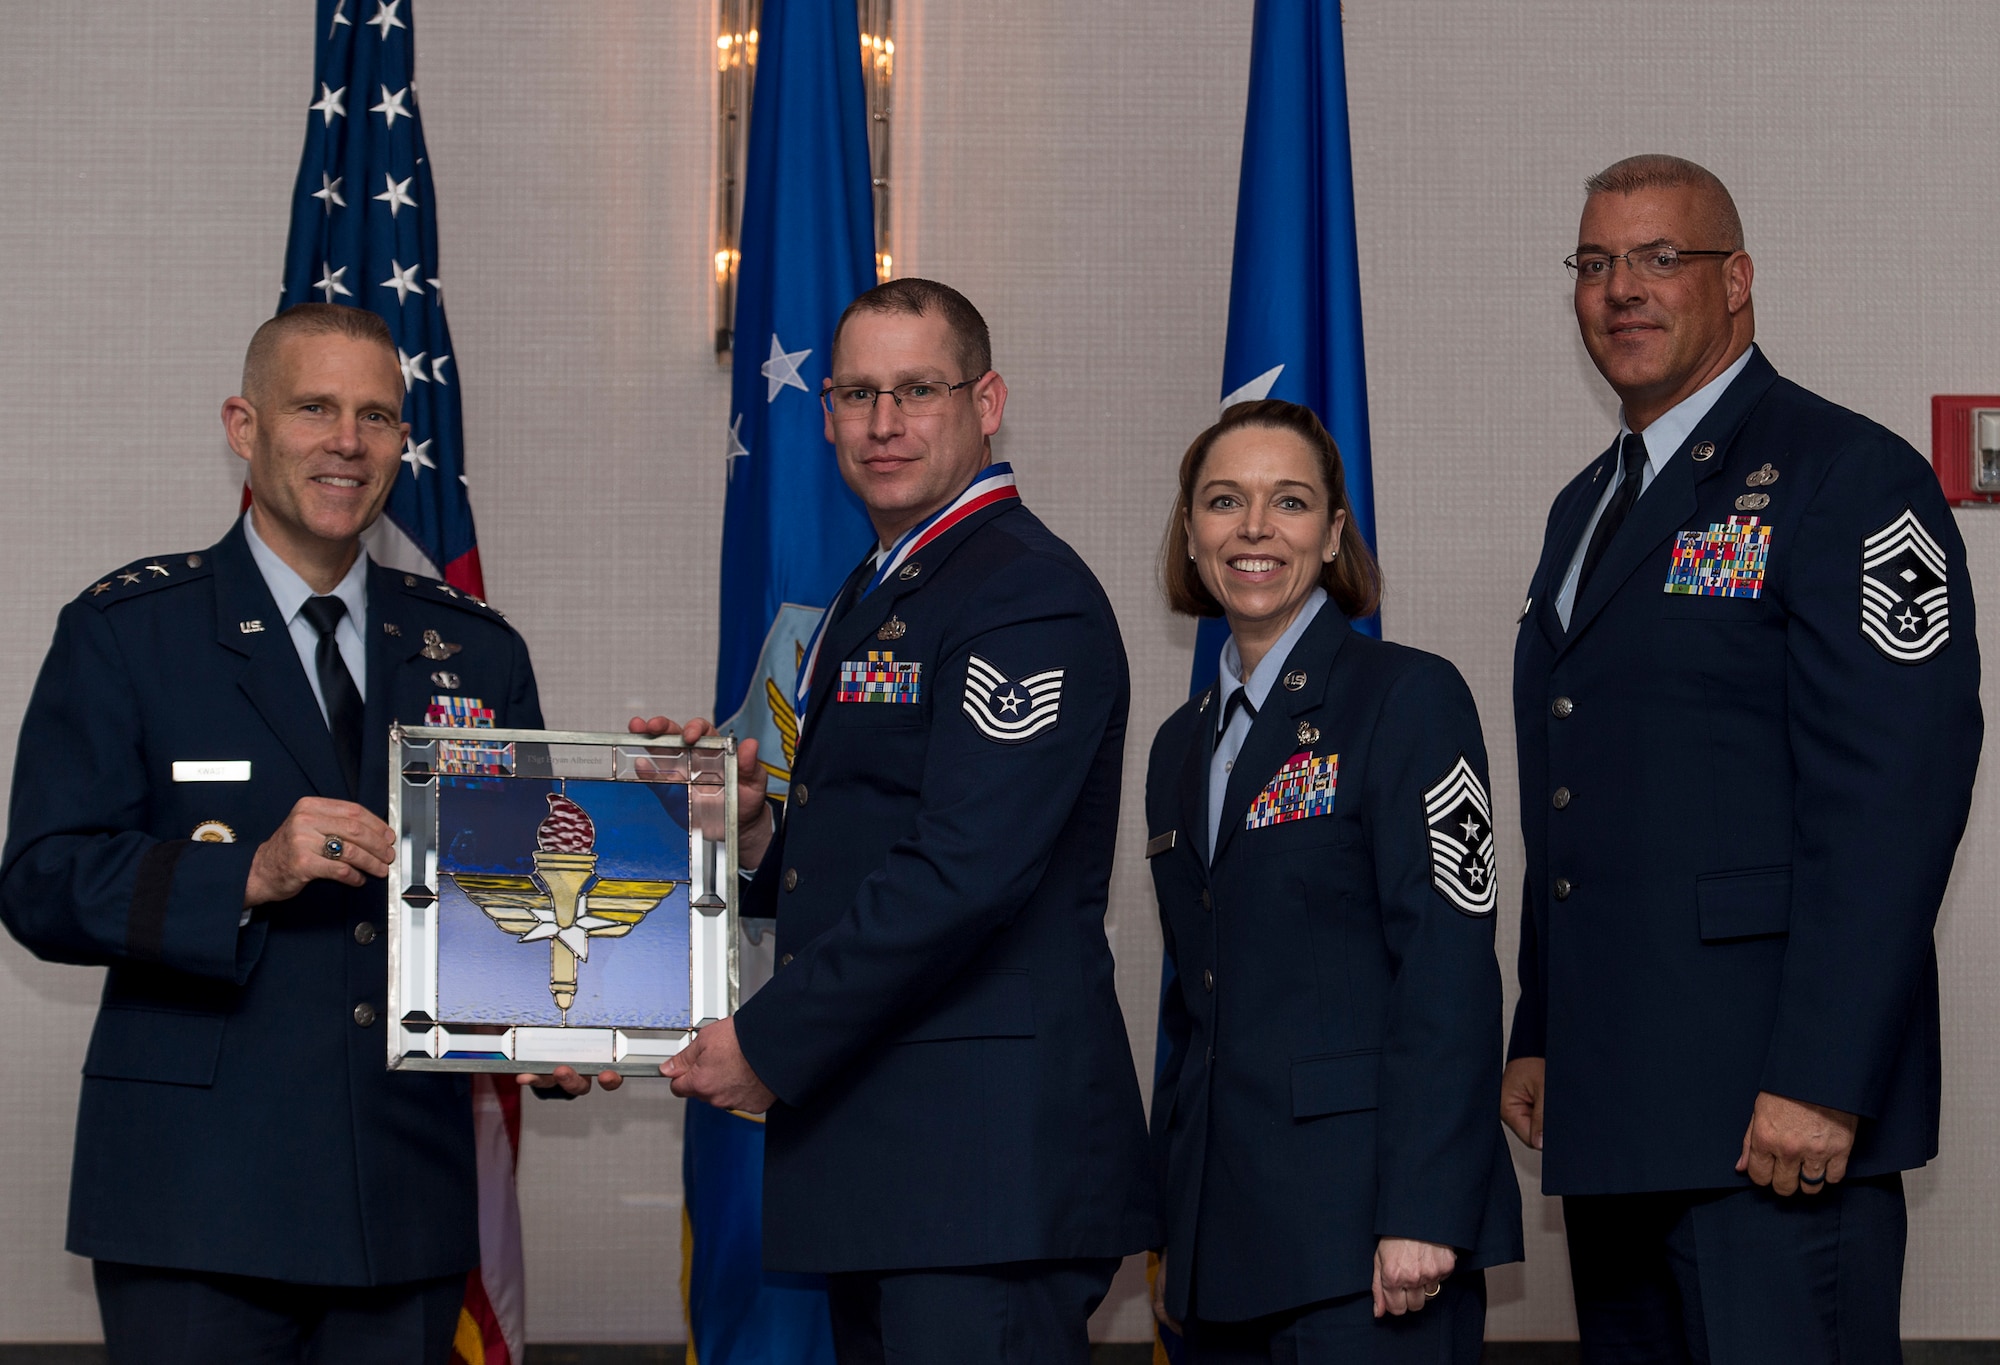 U.S. Air Force Tech. Sgt. Bryan S. Albrecht, noncommissioned officer in charge of Radar, Airfield, & Weather Systems assigned to the 14th Operations Support Squadron at Columbus Air Force Base, Miss., receives the Air Education and Training Command Non-Commissioned Officer of the Year Award from Lt. Gen. Steve Kwast, Commander of AETC during the AETC 12 Outstanding Airmen of the Year Awards banquet Feb. 22, 2018 in Orlando, Fla. Albrecht acted as Flight Chief for 9 months, managing 18 personnel, 770 inspections and 510 maintenance actions while also securing communications for 65,000 flights at AETC’s busiest airfield, directed 51 component distributions to four Major Commands, restoring navigation systems for five Wings and saved $622,000, as well as won Operation Group NCO of the Year. (U.S. Air Force photo by Staff Sgt. Kenneth W. Norman)